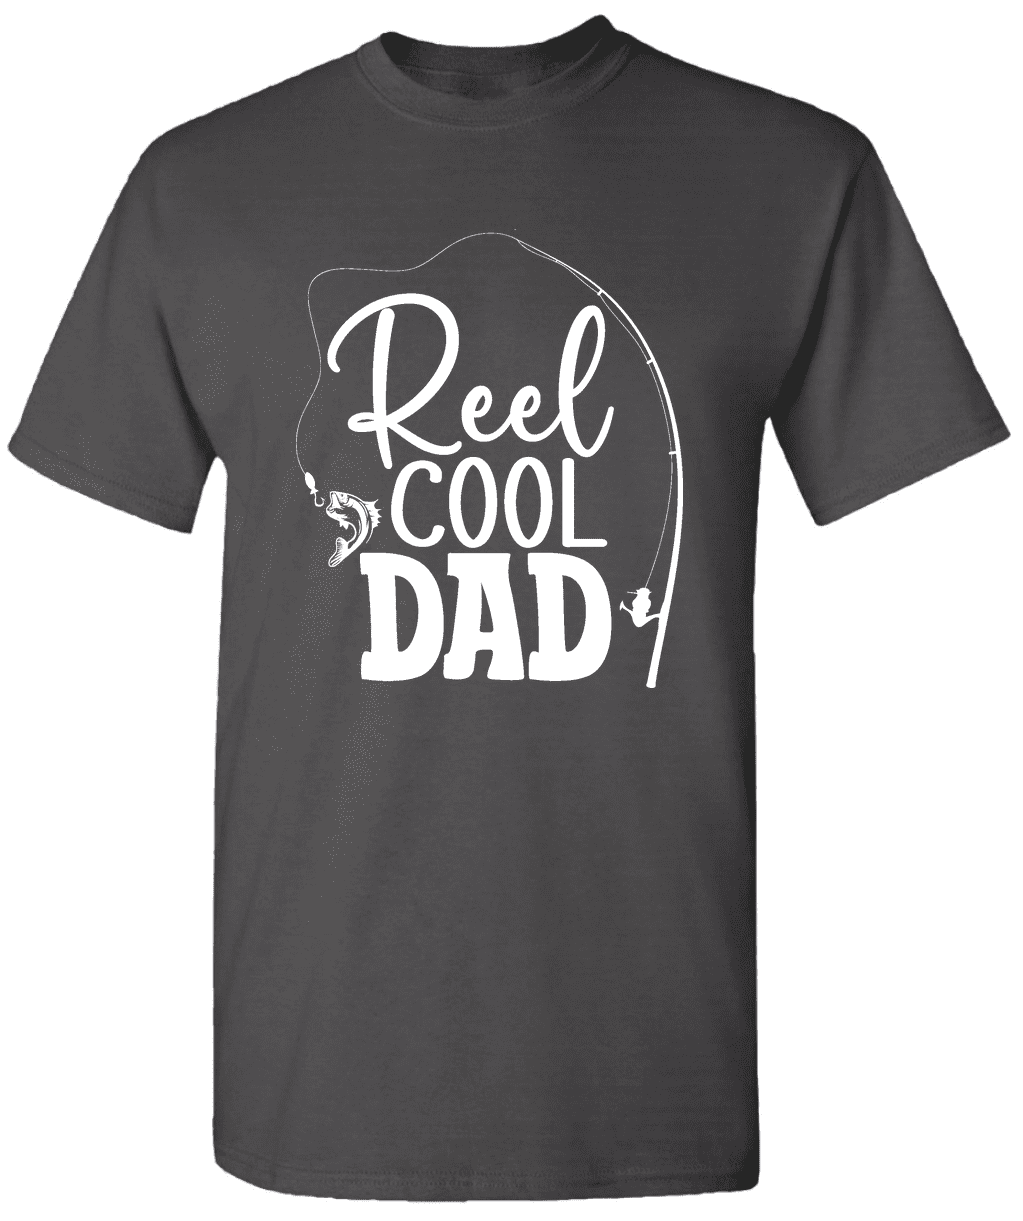 Reel Cool Papa Fishing T-Shirt Men's Size 2X Pole graphic Grey New with Tags